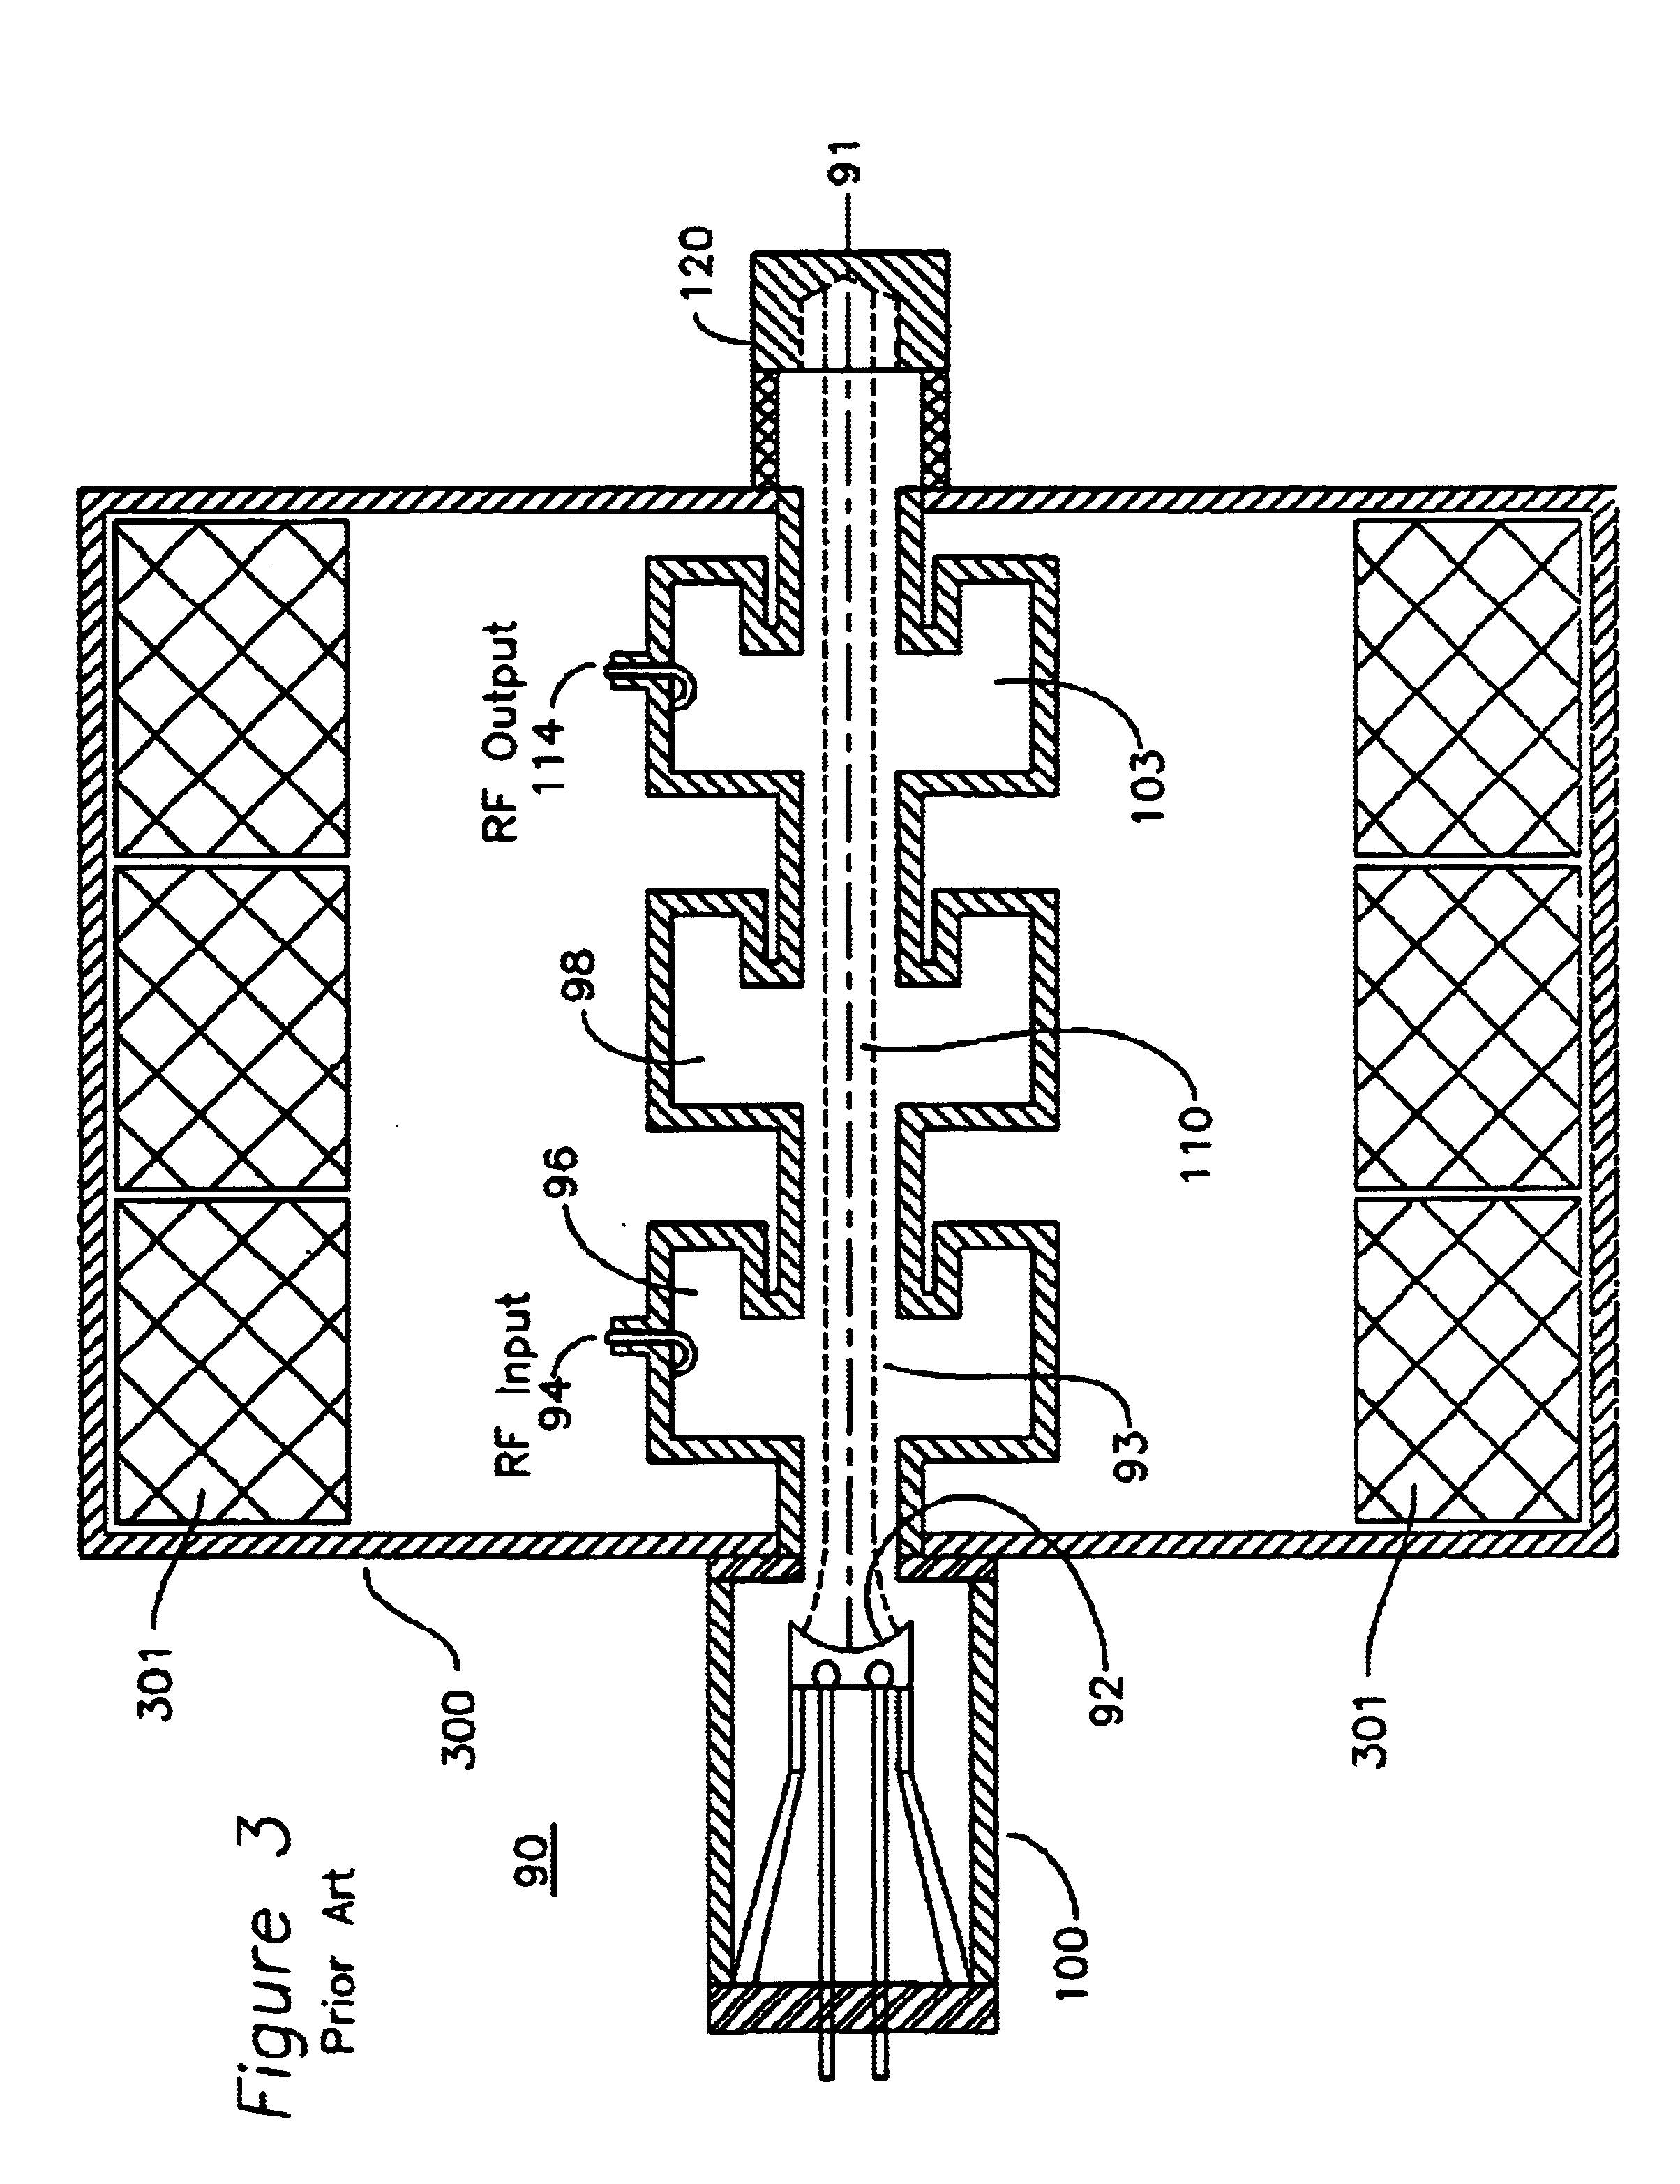 Electron gun for a multiple beam klystron using magnetic focusing with a magnetic field corrector